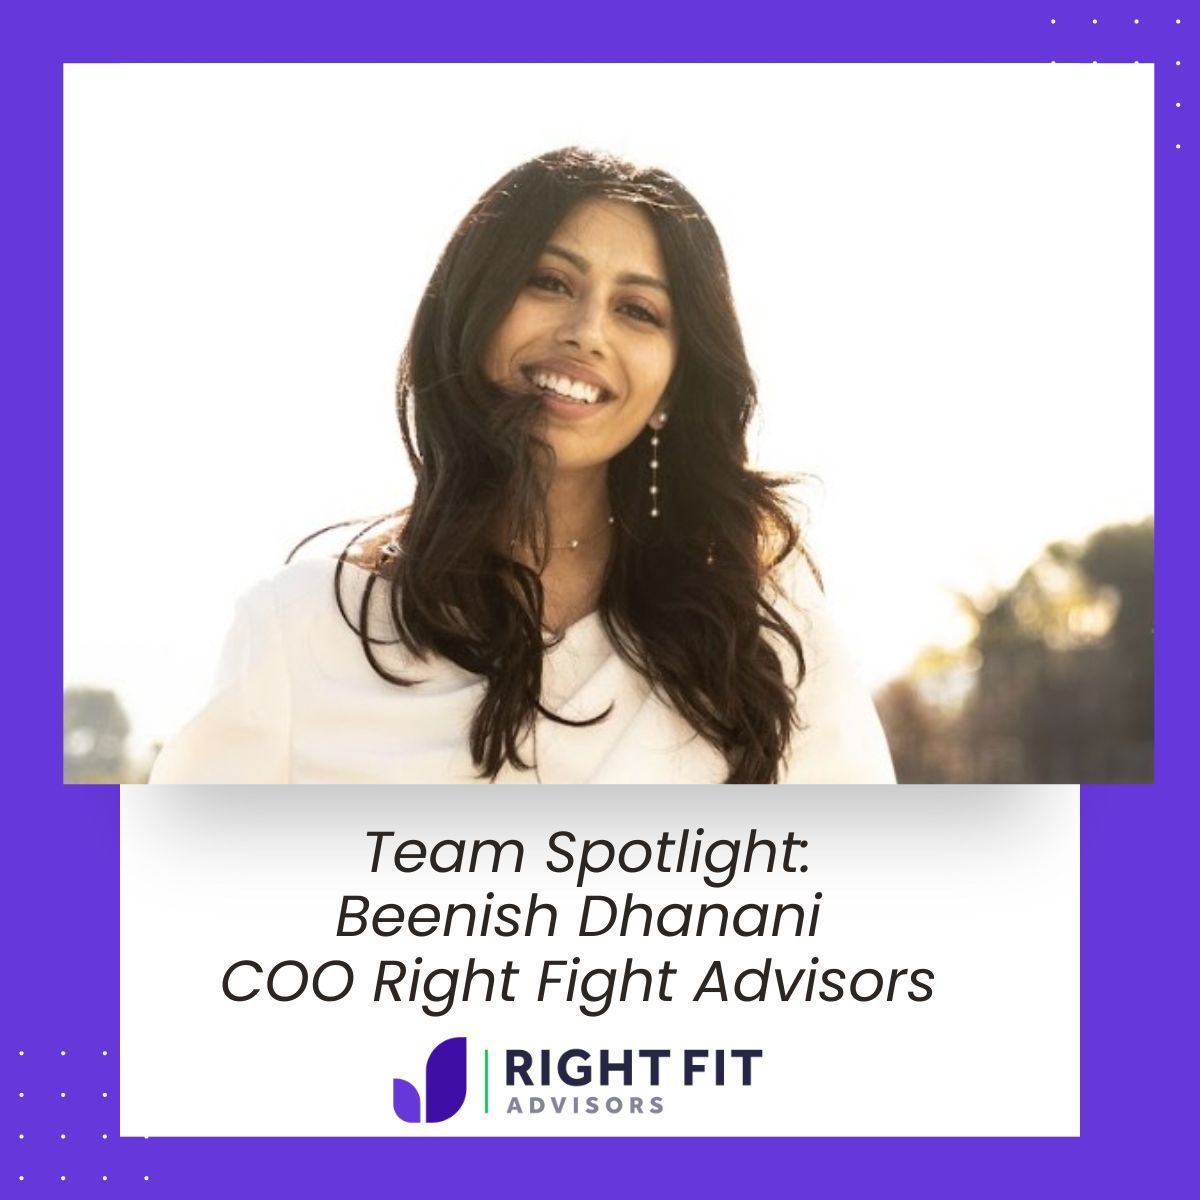 Beenish, a skilled leader, excels in driving operational growth and fostering collaboration in our recruiting firm. Her passion for Corporate Social Responsibility aligns perfectly with our company ethos, inspiring us to make an impact. #GrowthLeader #CorporateResponsibility